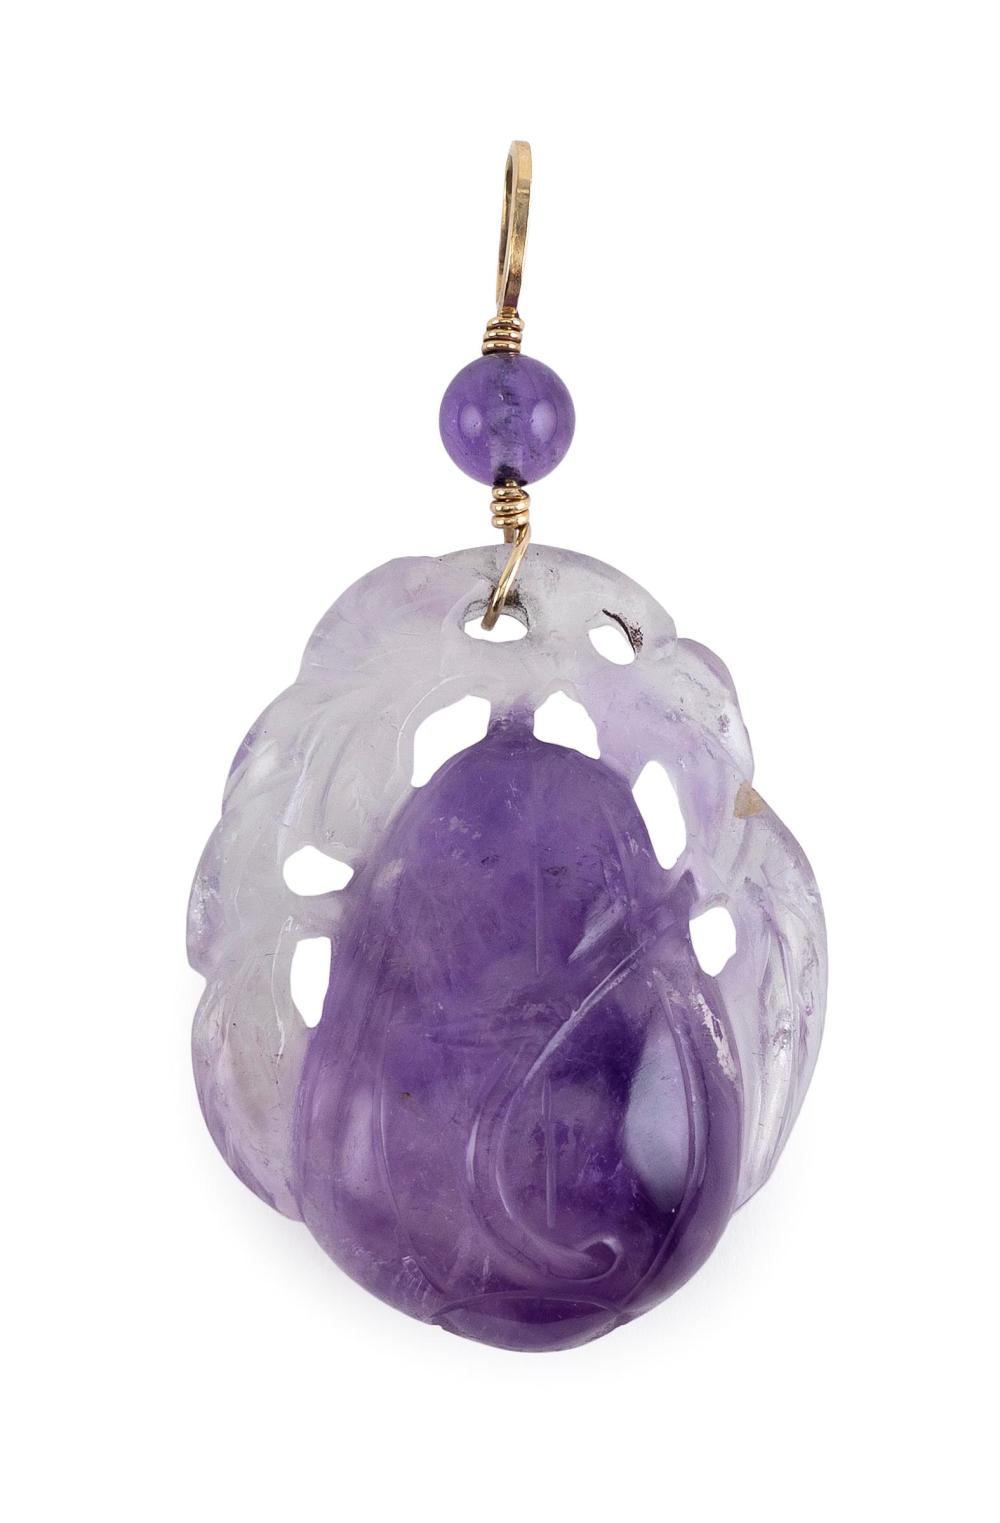 CHINESE CARVED AMETHYST PENDANT